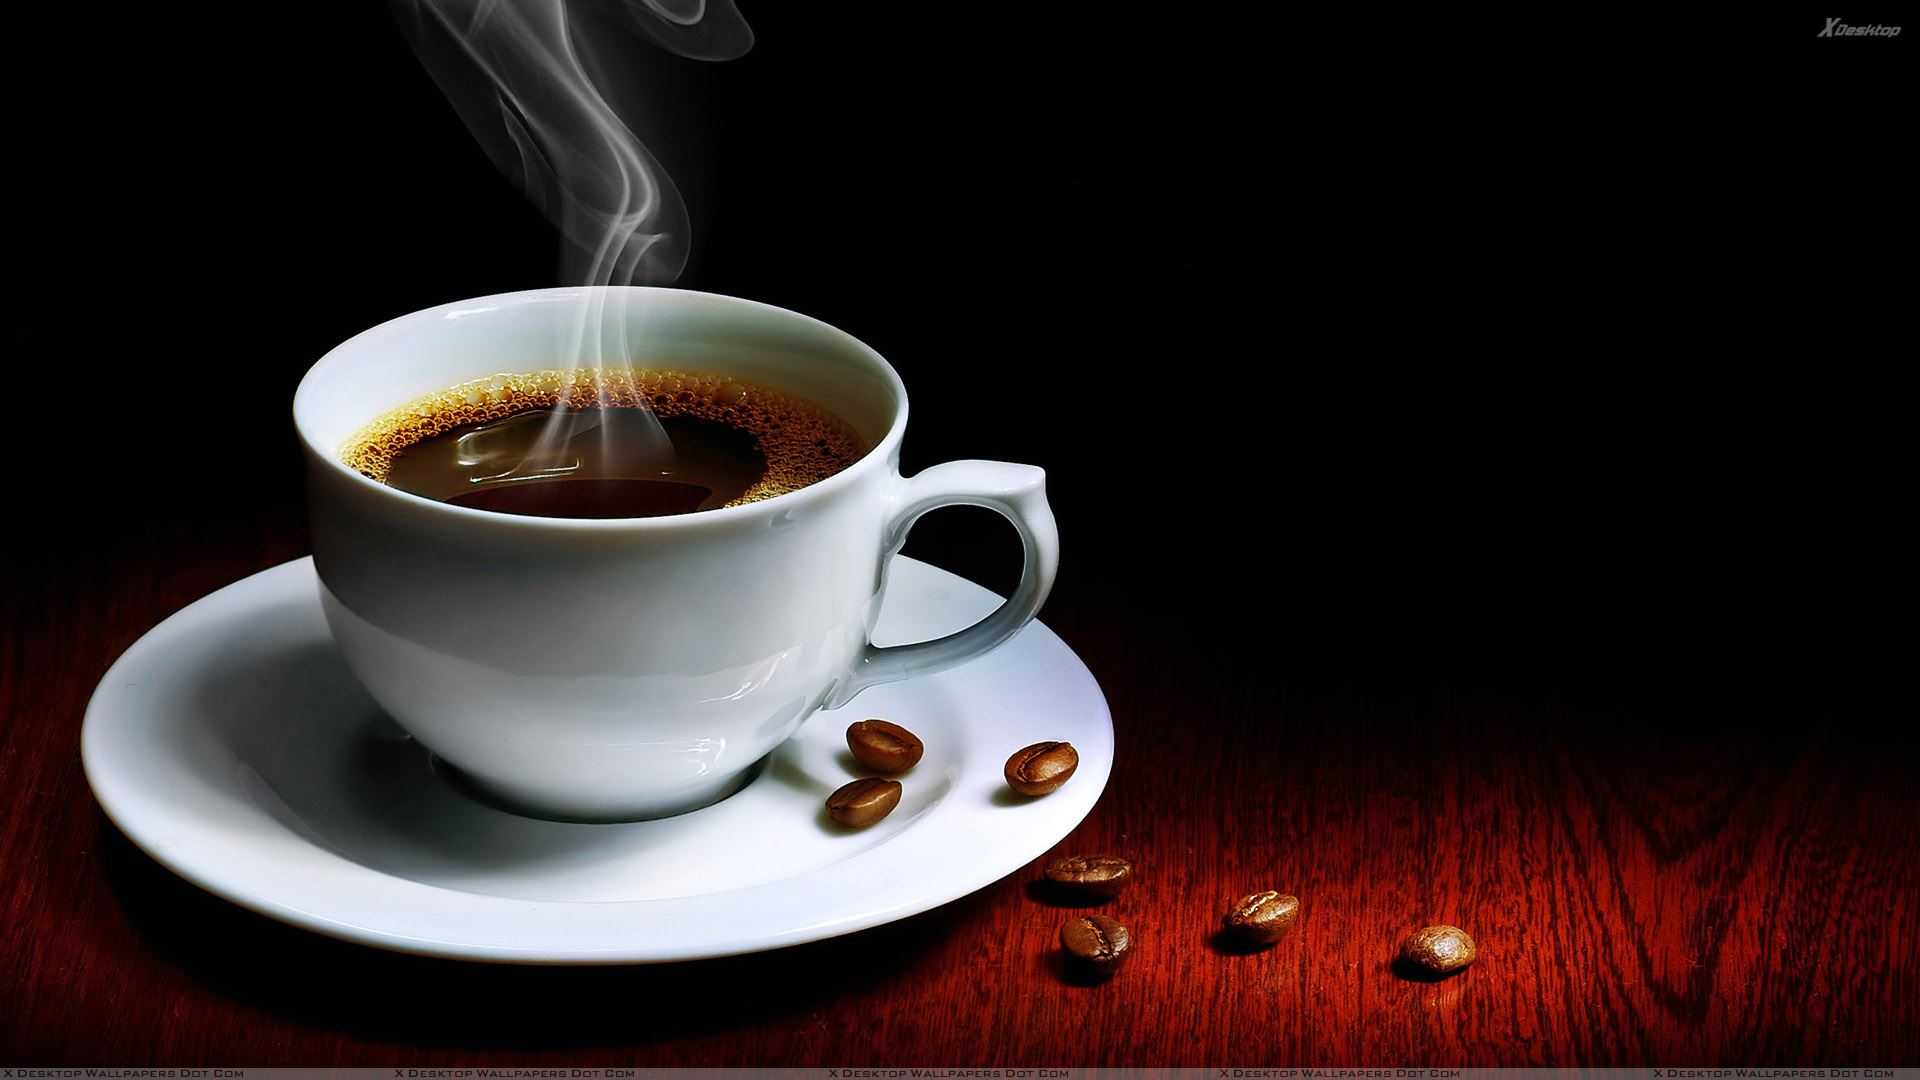 https://www.comunicaffe.com/wp-content/uploads/2014/12/Coffee-White-Cup.jpg